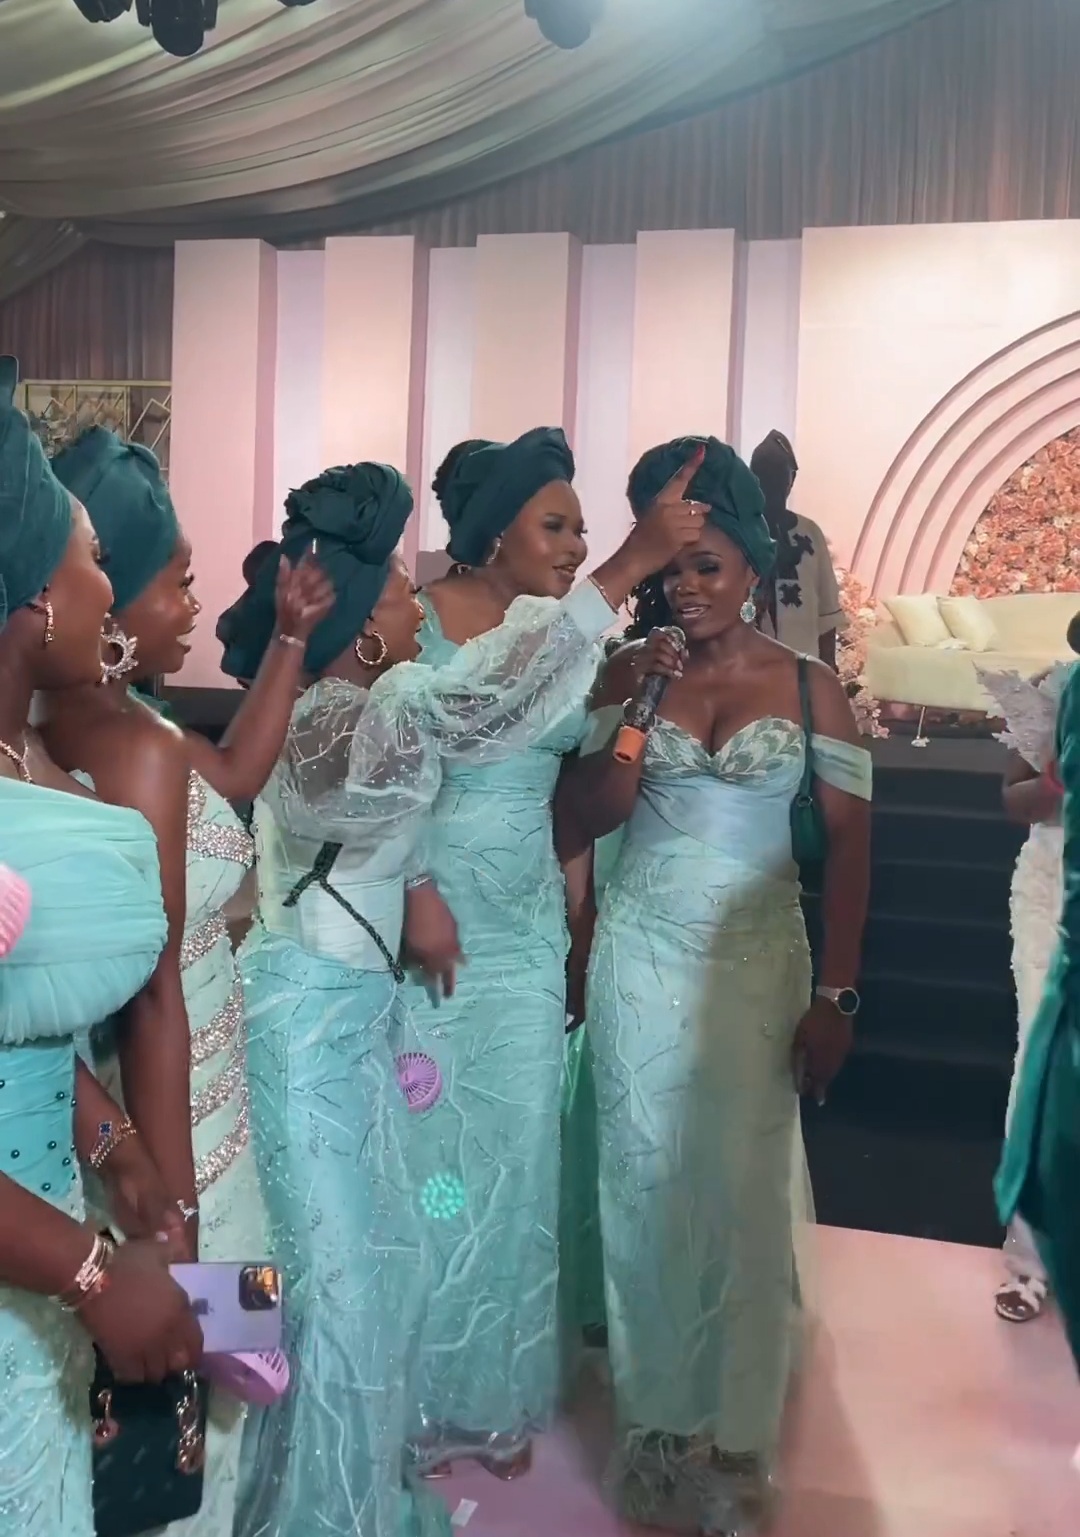 Who’s Your Successful Group? This Bridal Occasion Face-off Will Make You Snigger